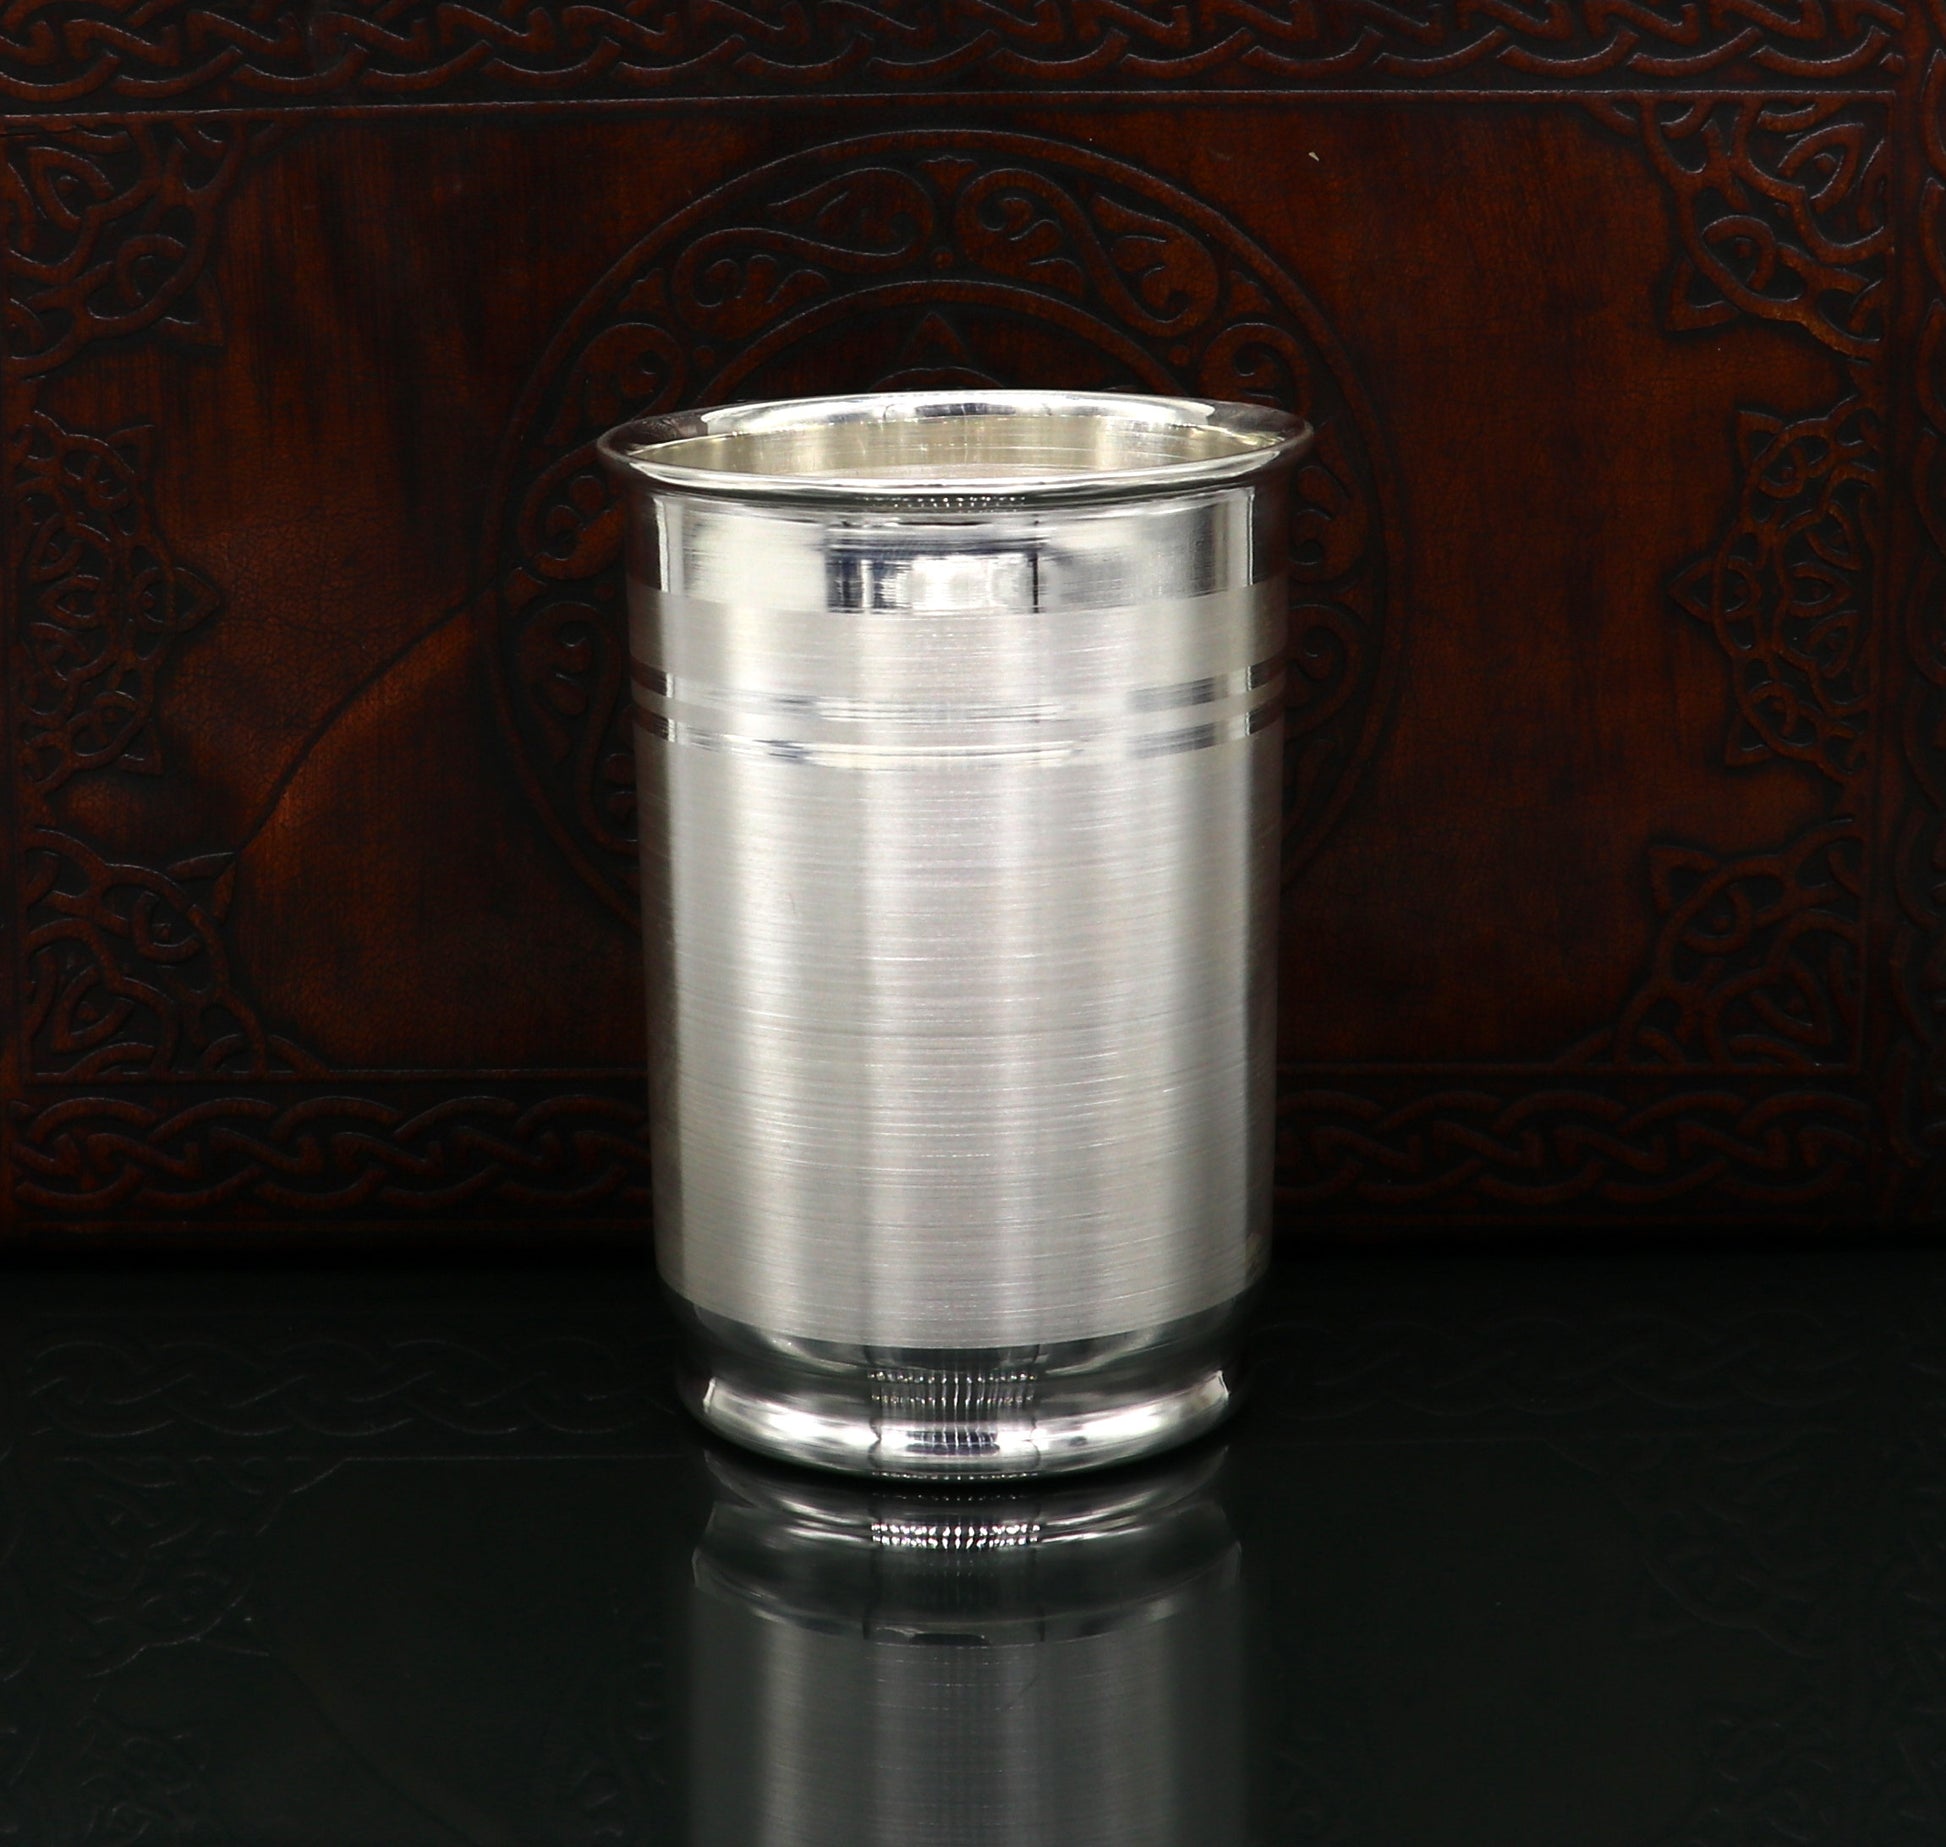 999 pure solid silver handmade water glass or milk tumbler, best silver baby food art, excellent baby gifting utensils, silver article sv123 - TRIBAL ORNAMENTS